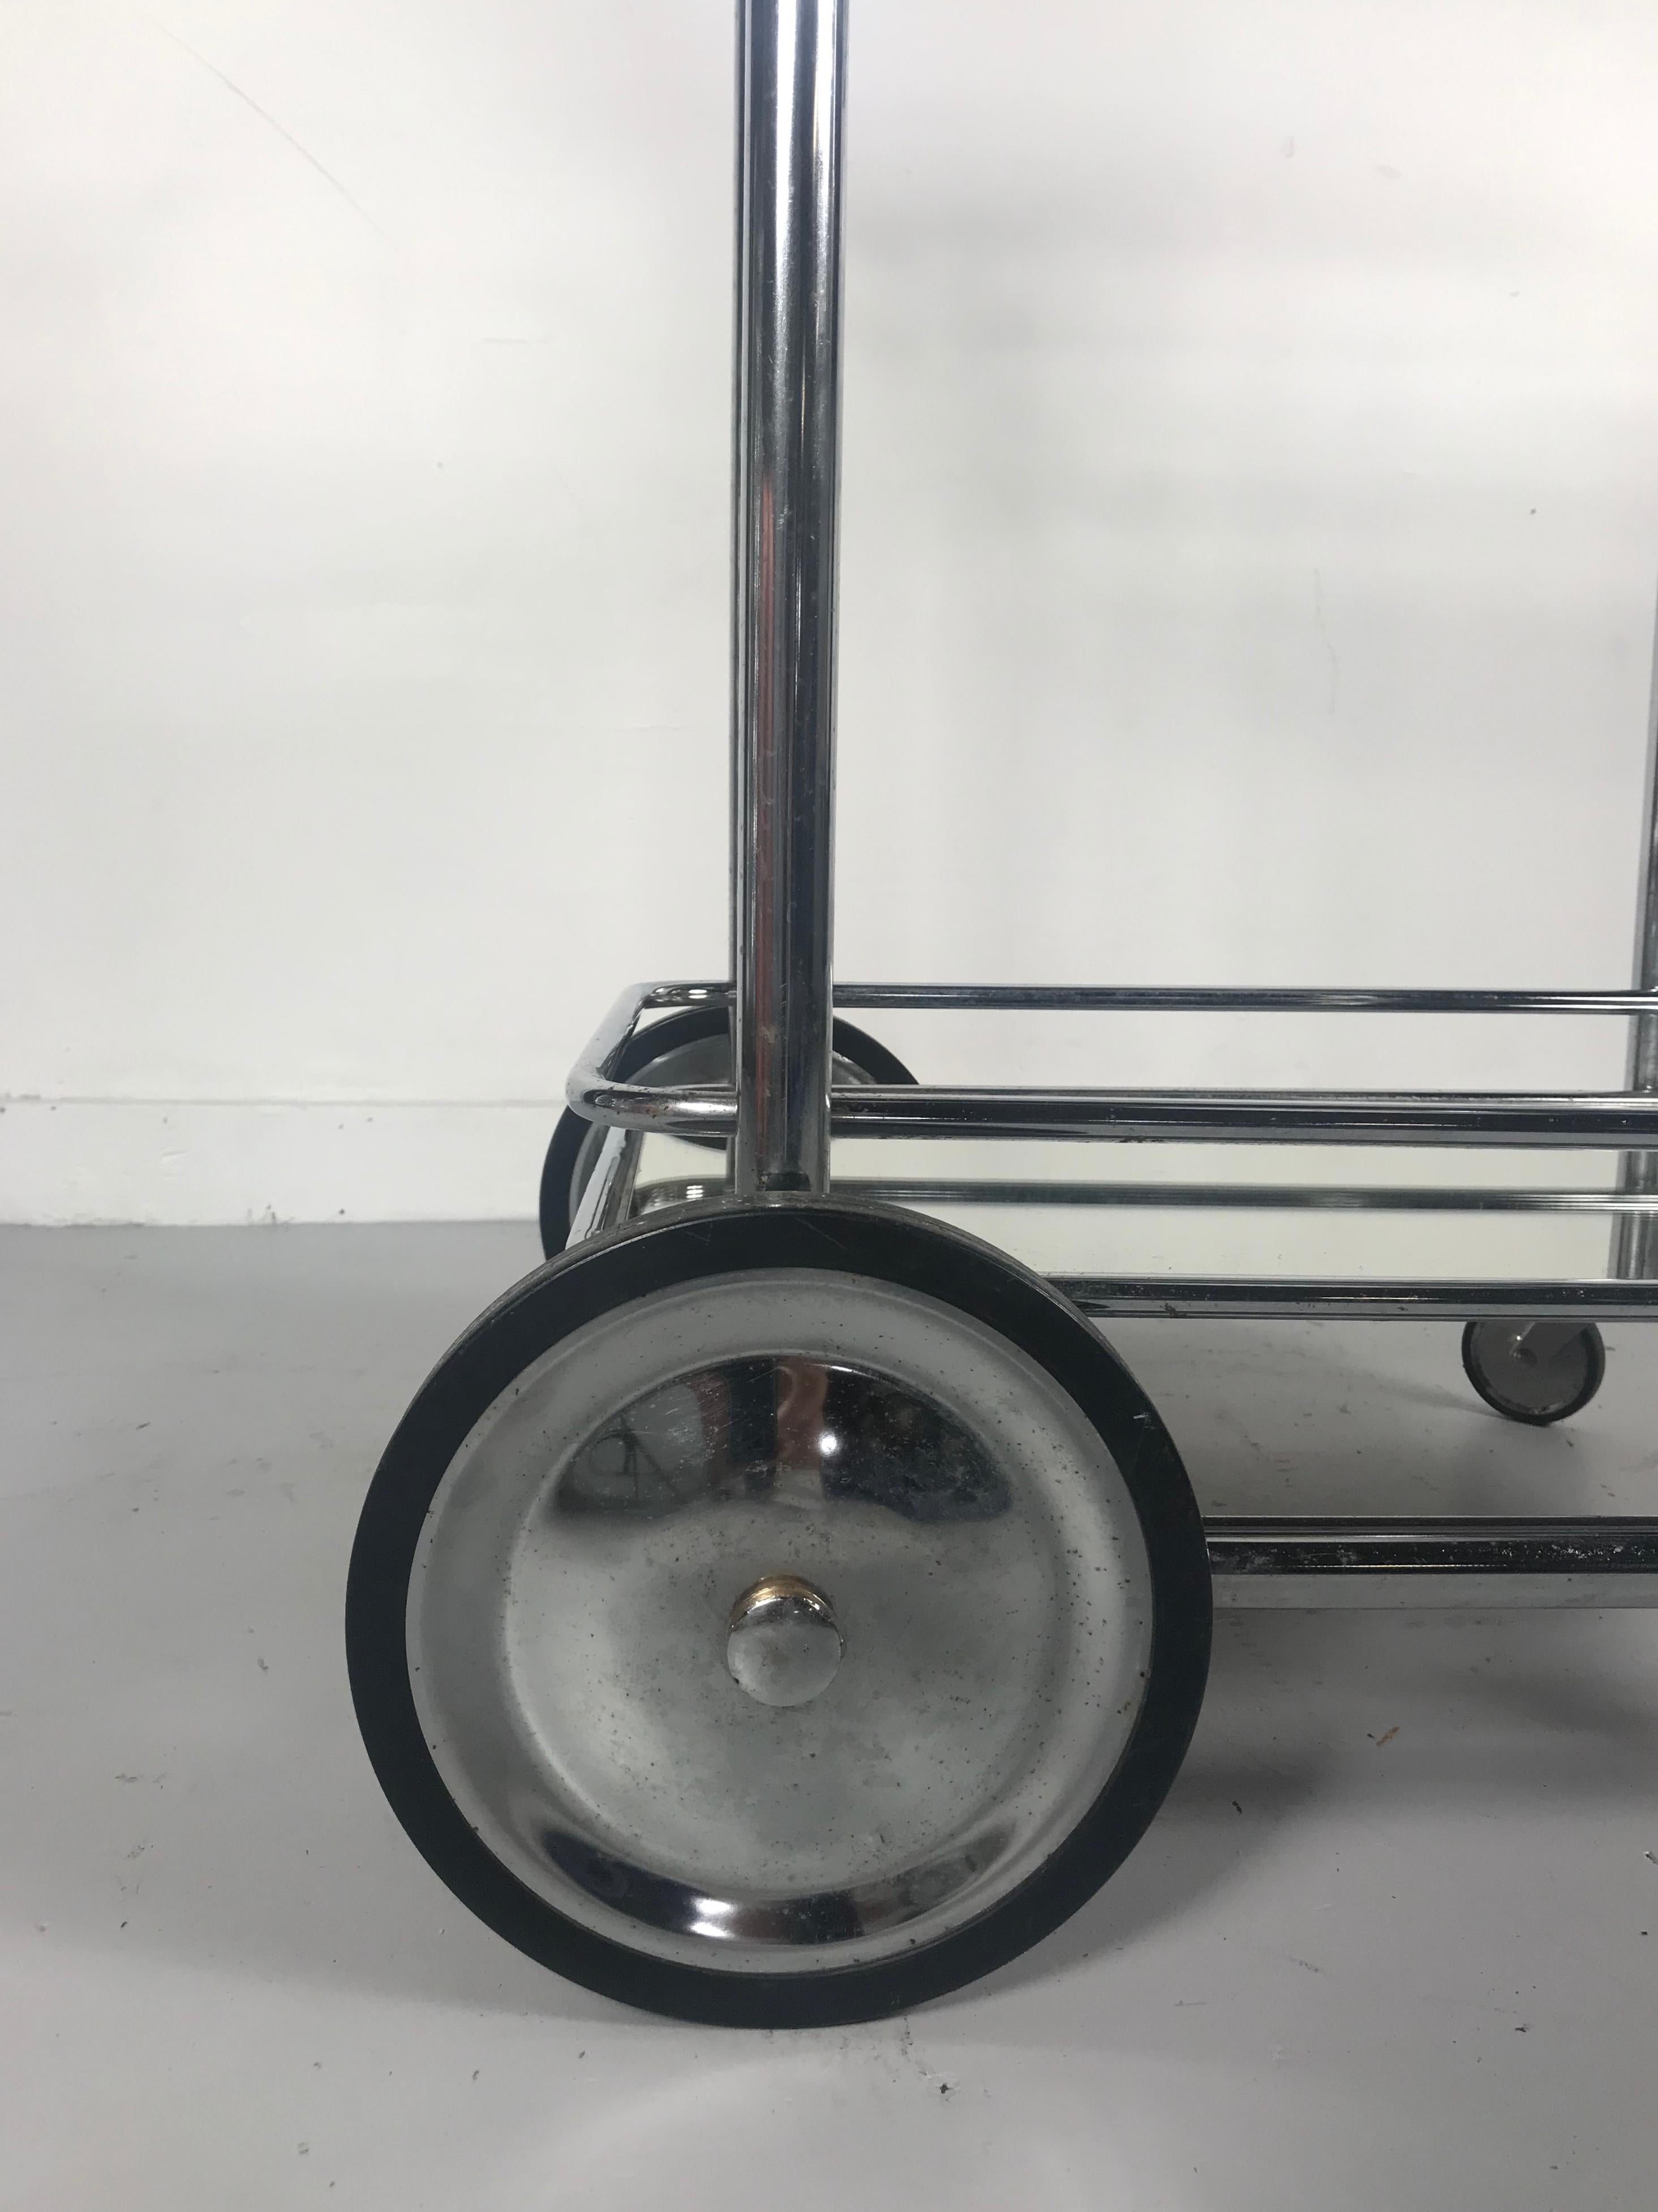 Art Deco streamline tubular chrome and glass rolling bar cart or trolley, wonderful scale and proportion, Bauhaus inspired, retains original mirror and glass shelves. Fit seamlessly into any modernist, contemporary, antique eclectic environment.